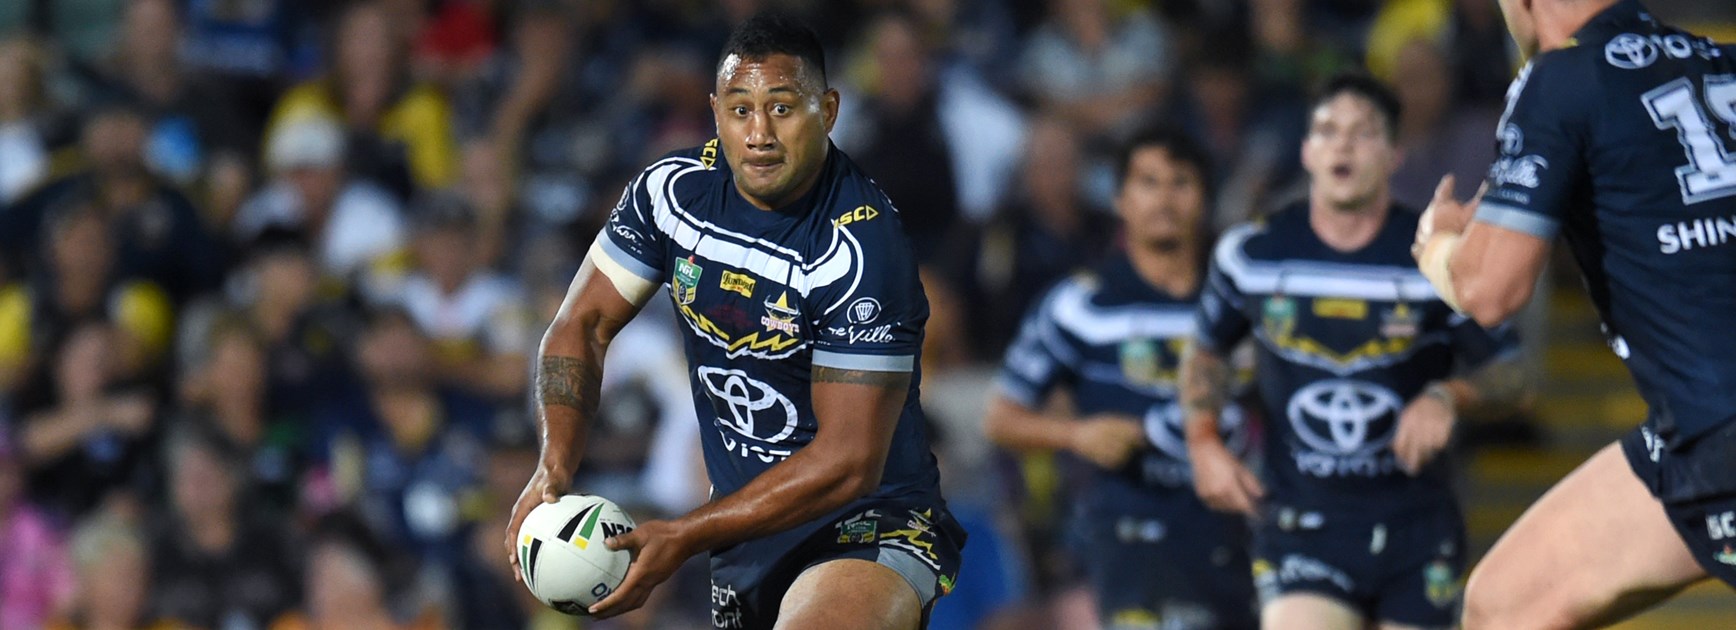 Molo extends stay with Cowboys